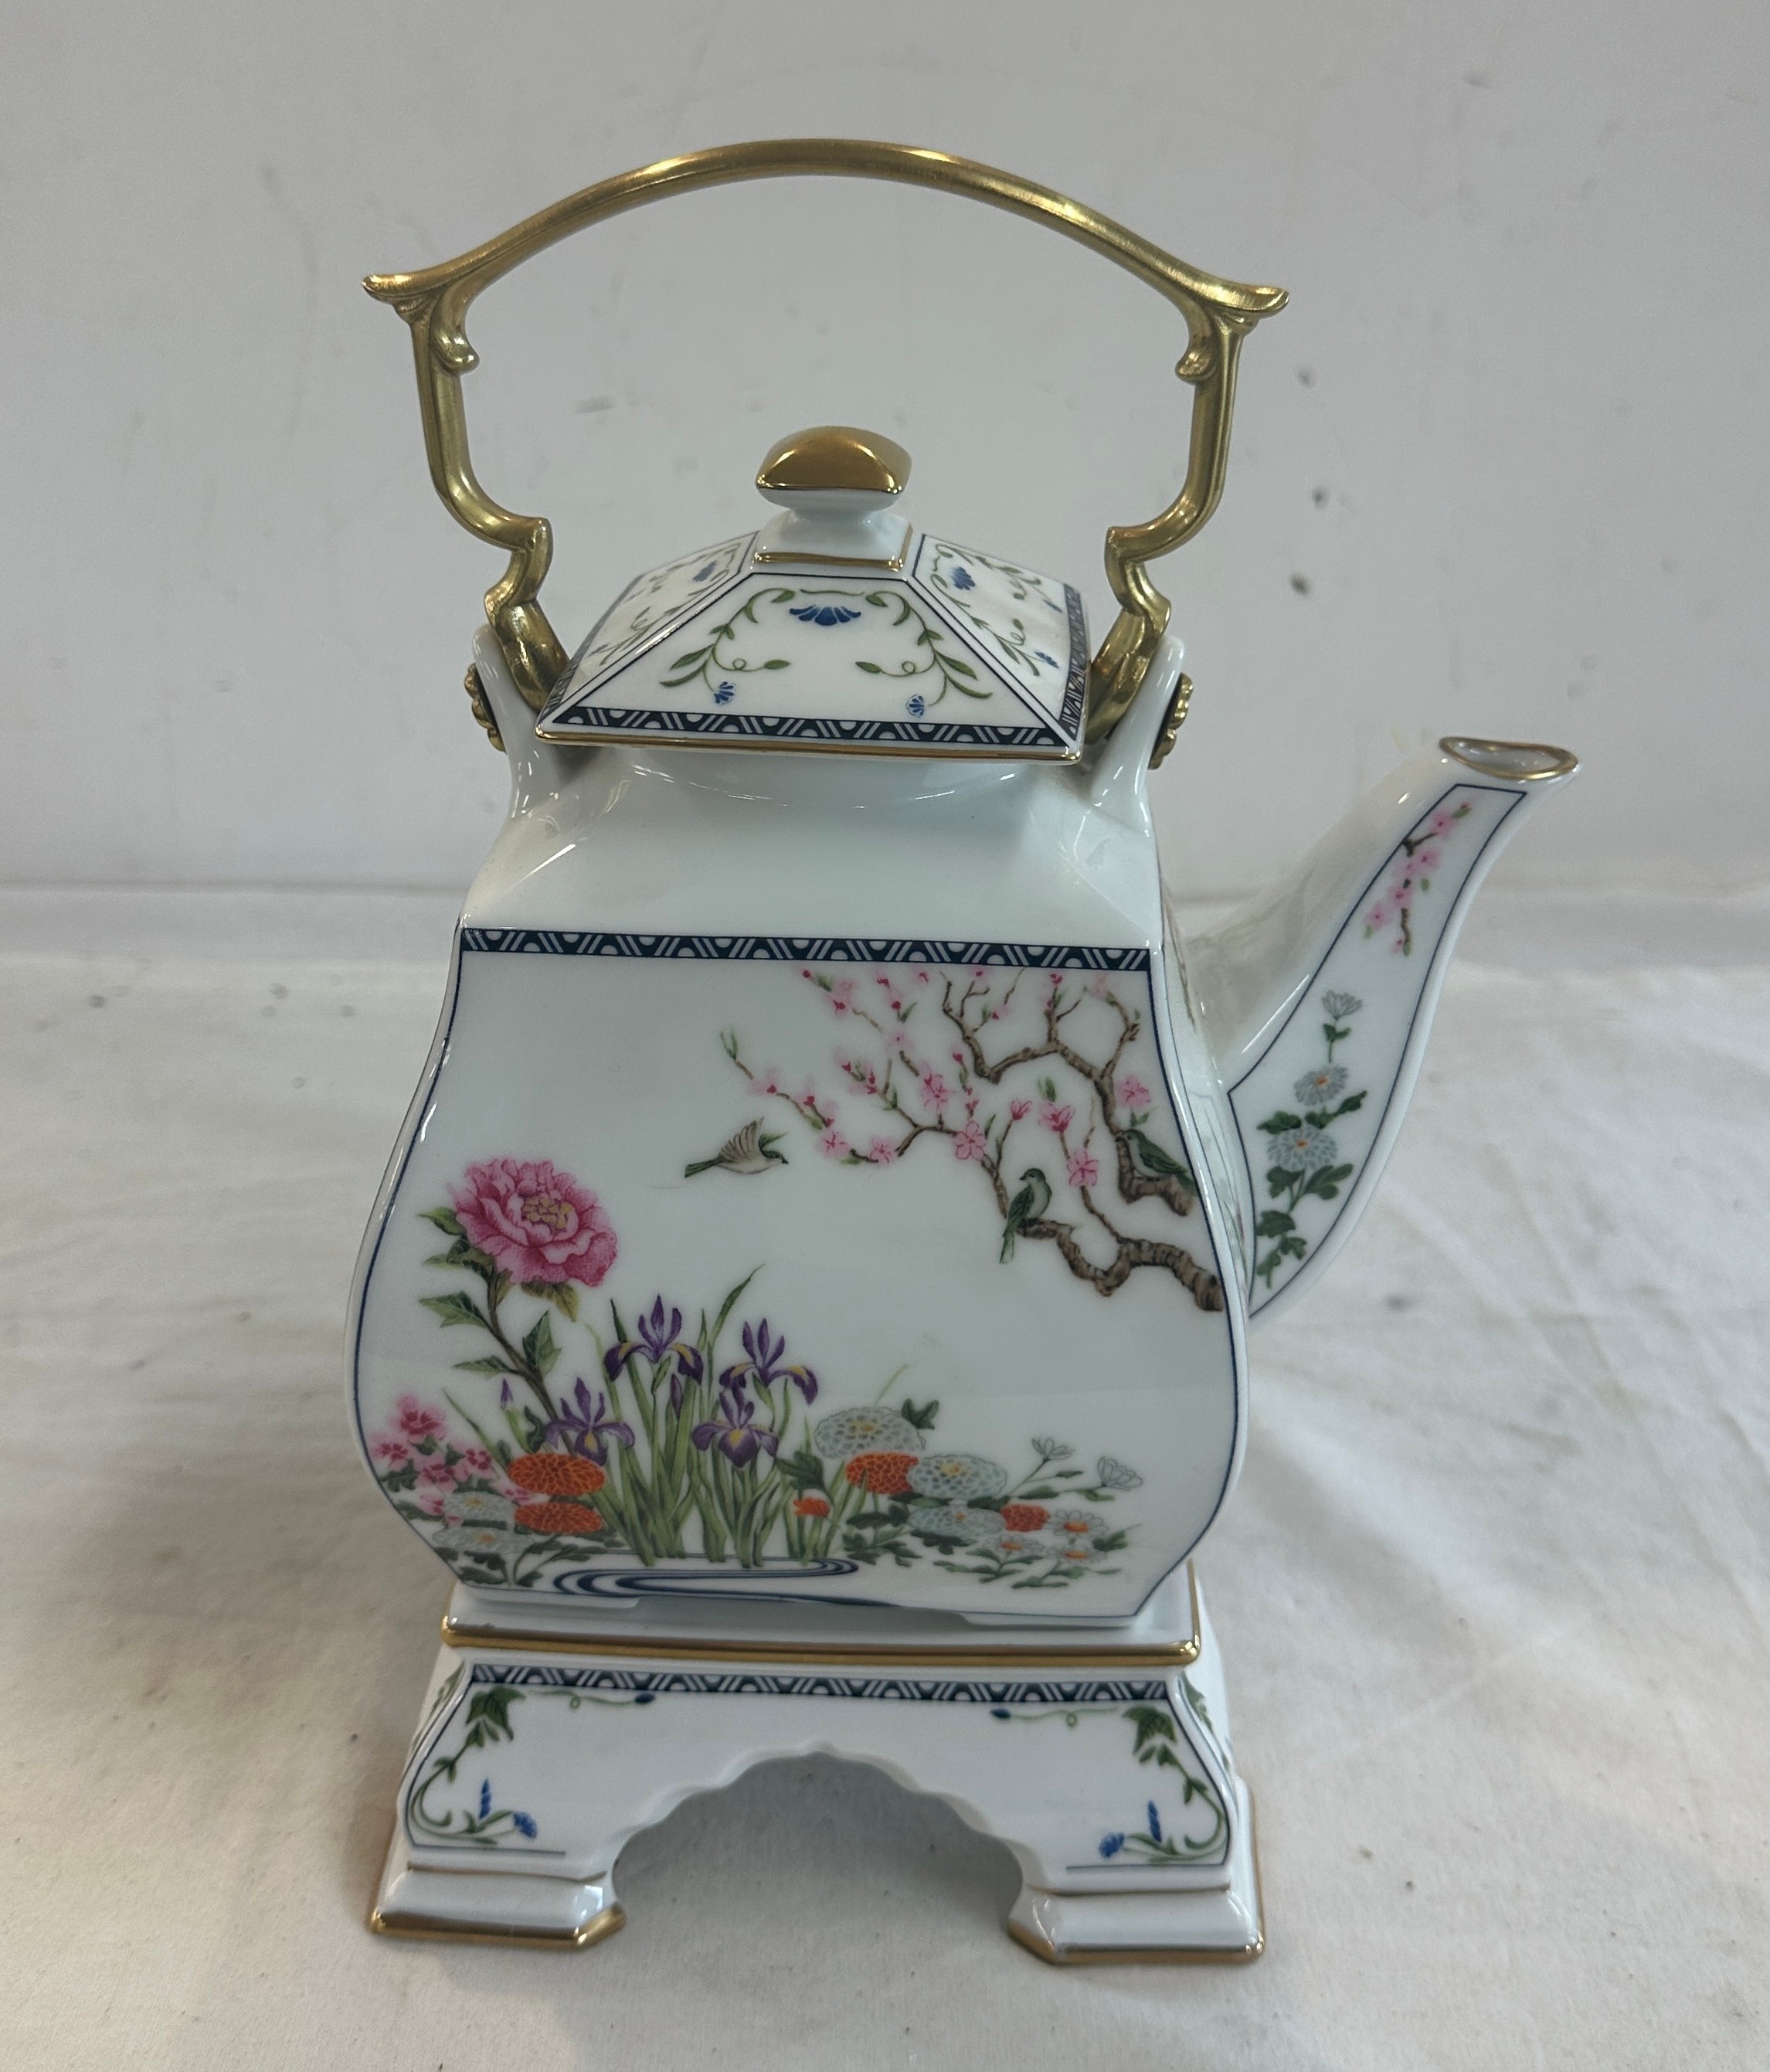 Franklin mint teapot "birds and flowers or the orient" designed by Naoko Nobata height 11 inches - Bild 3 aus 7